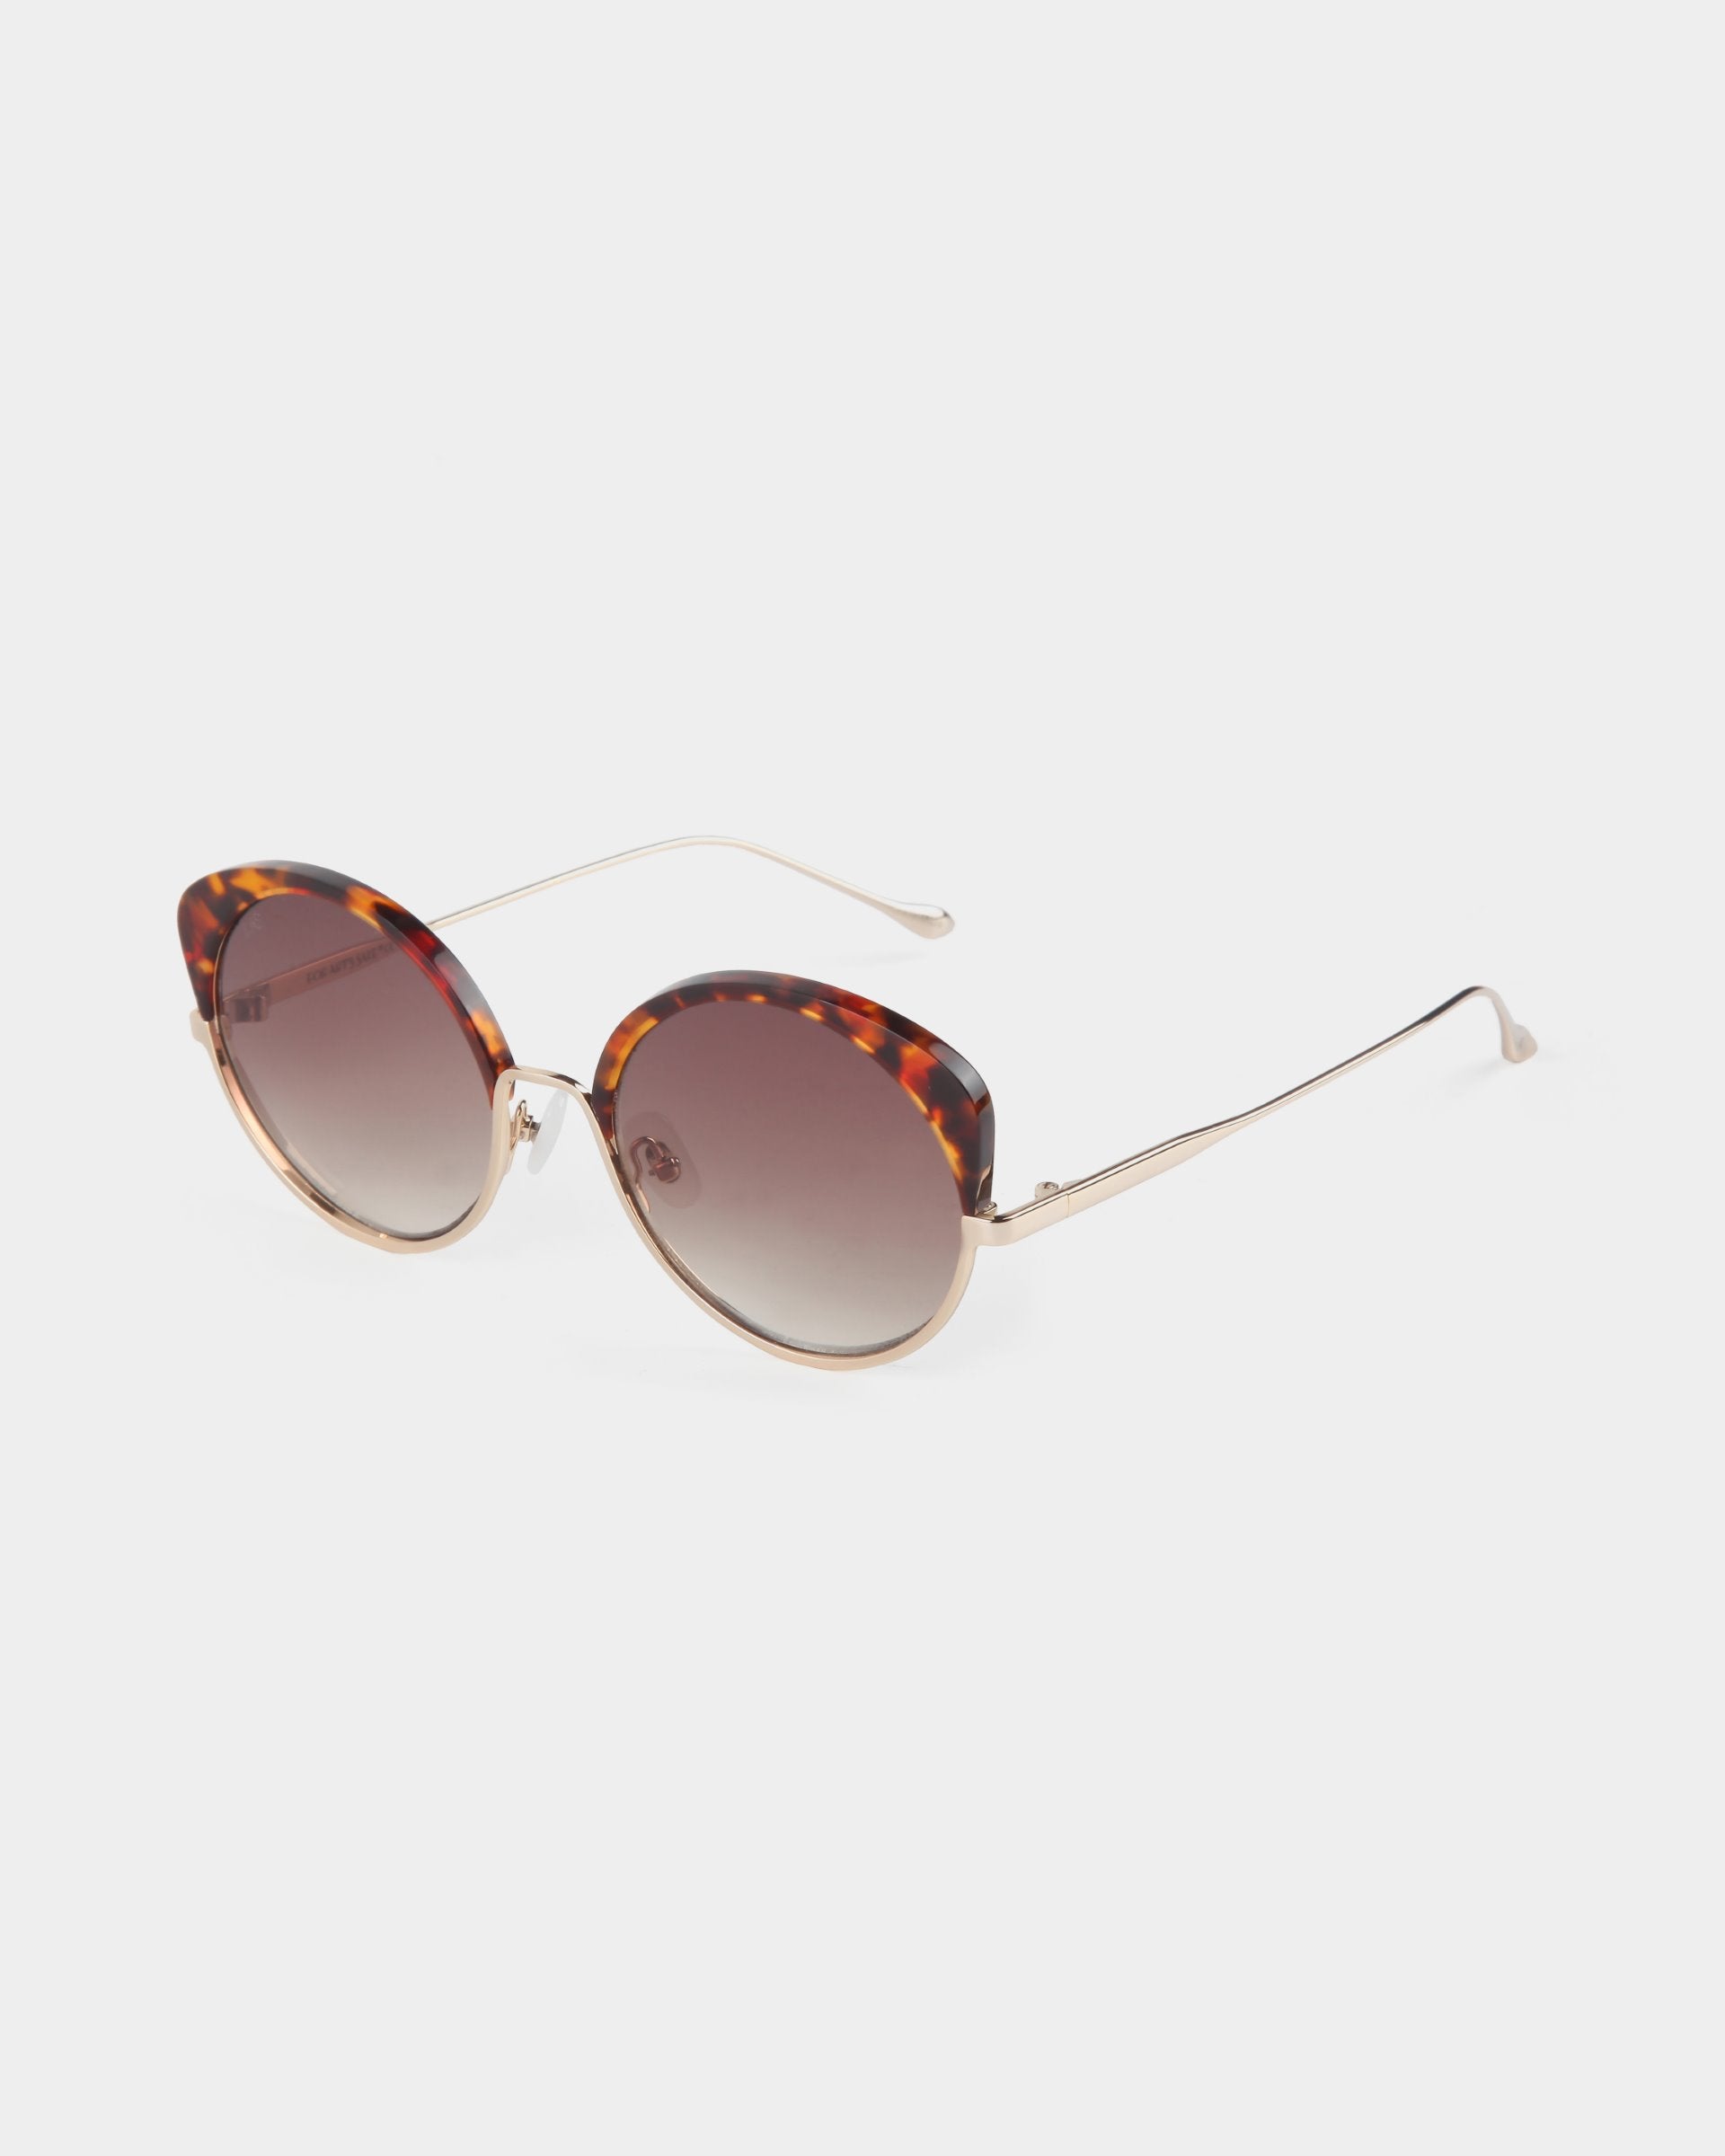 Cocoon by For Art&#39;s Sake®: Cat-eye sunglasses with tortoiseshell pattern on the upper frame and temples, featuring gold metal arms and gradient brown lenses, offering UV protection, set against a plain white background.